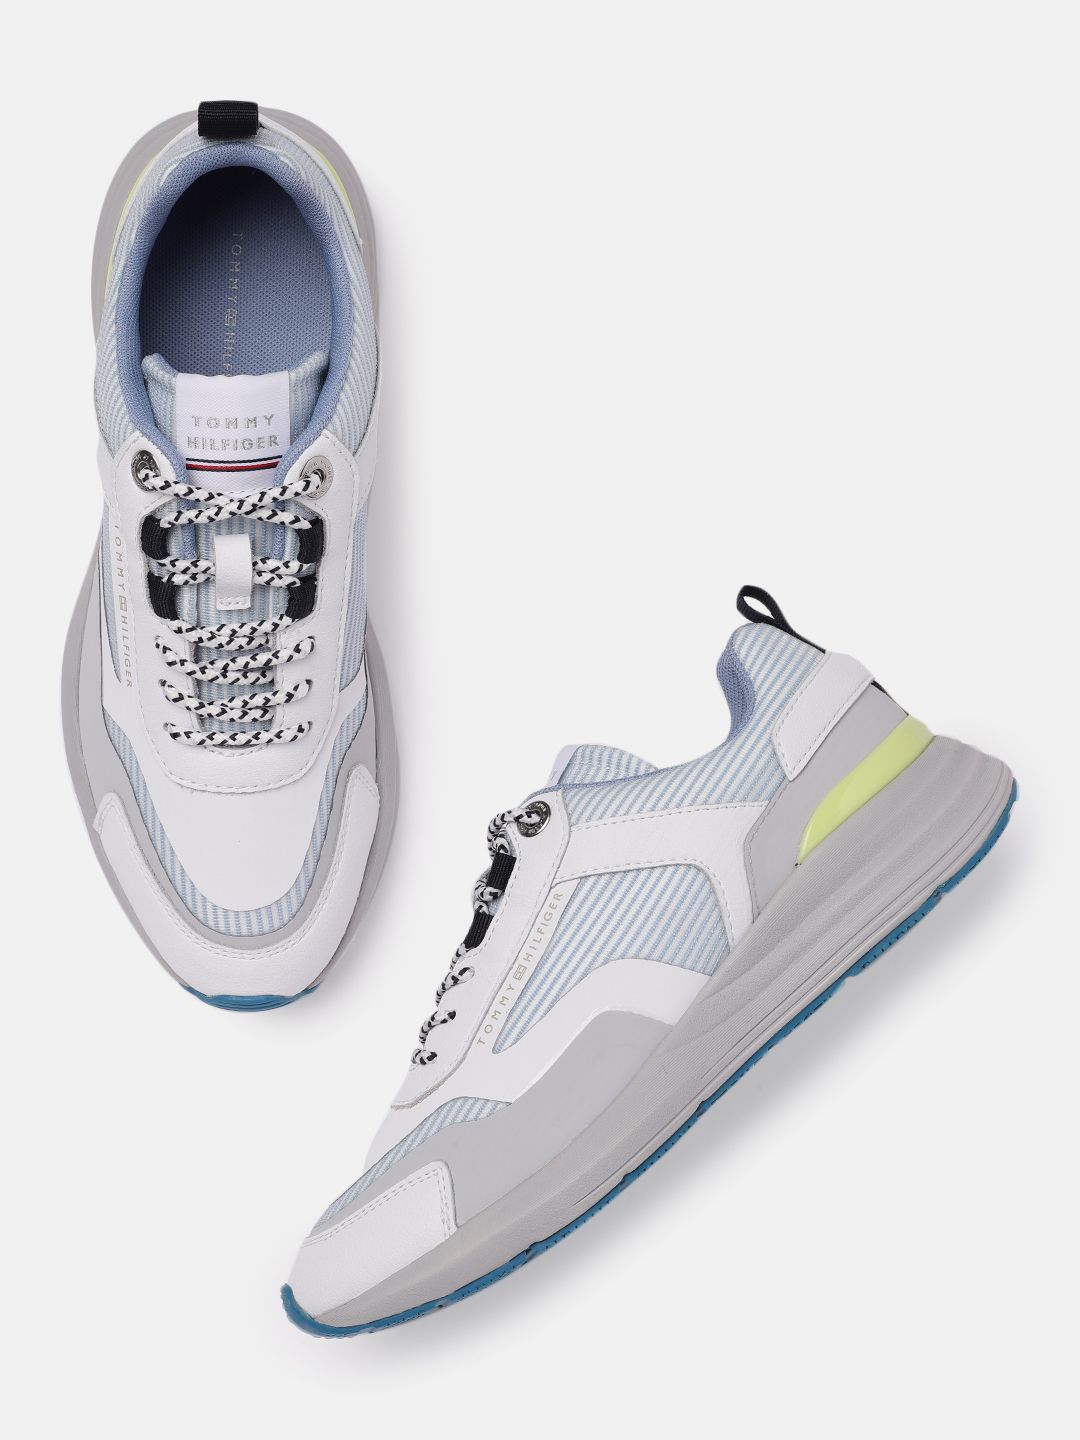 Tommy Hilfiger Women White & Grey Striped Sneakers Price in India